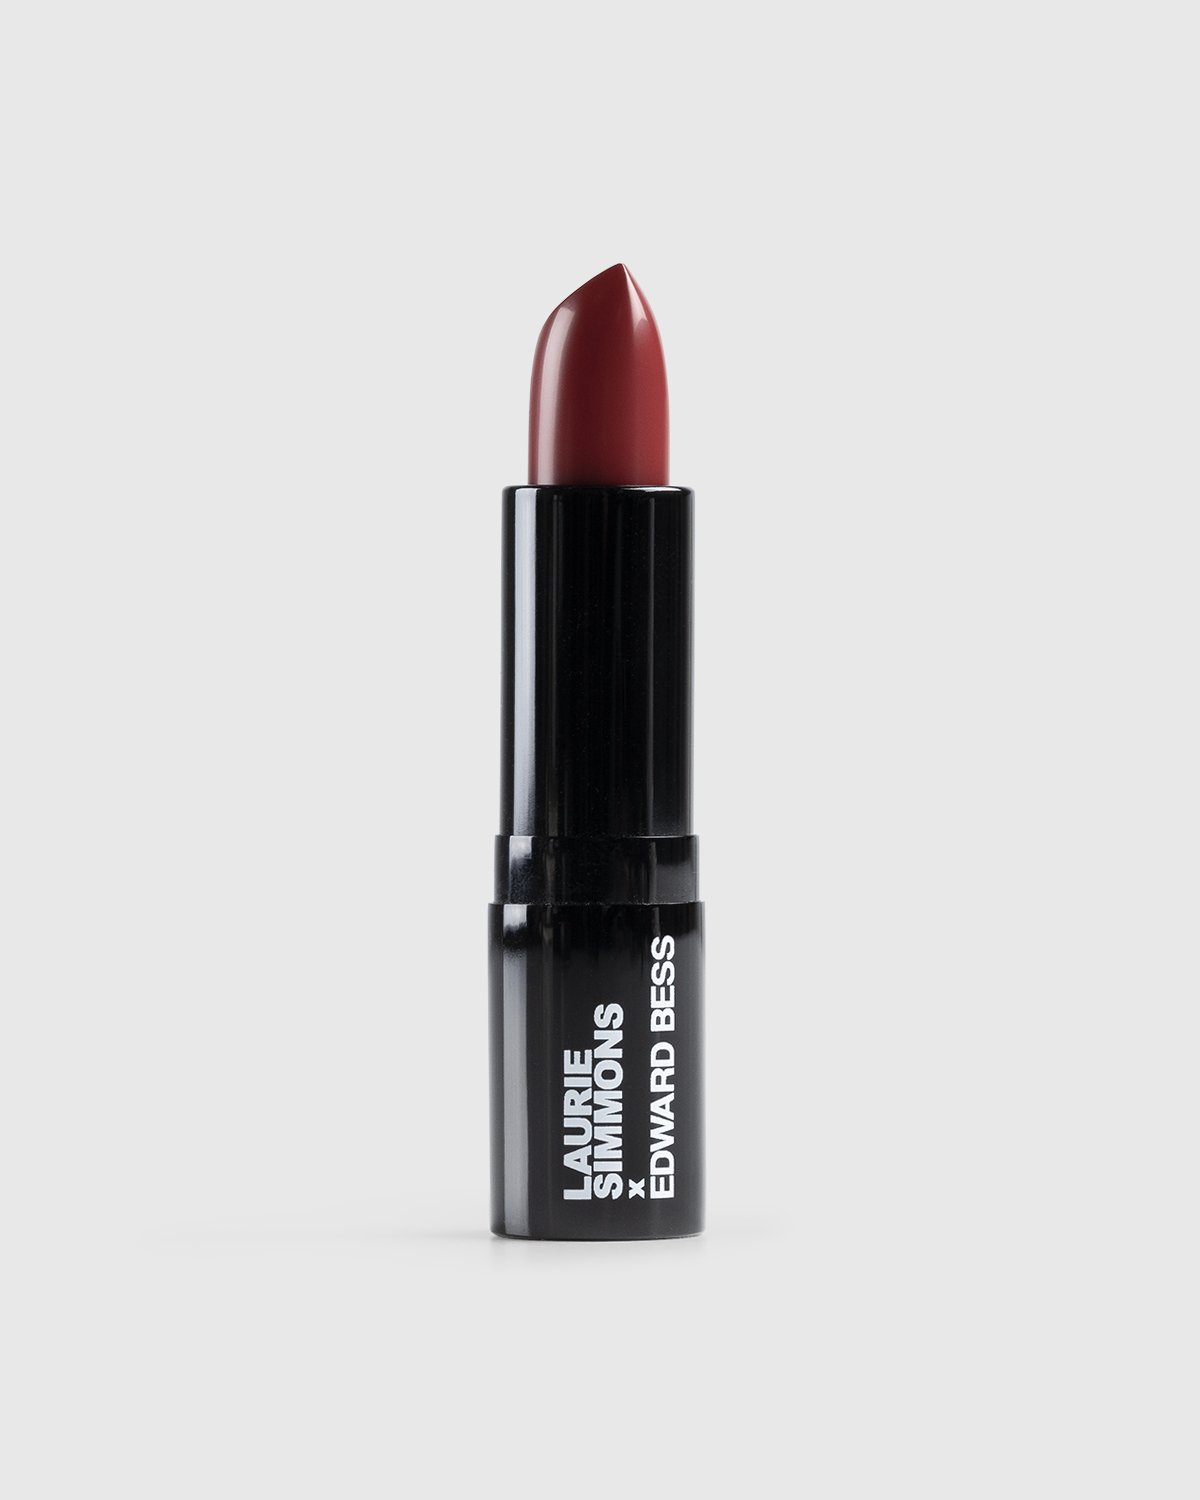 Laurie Simmons x Edward Bess x Highsnobiety - Lipstick - Lifestyle - Red - Image 1